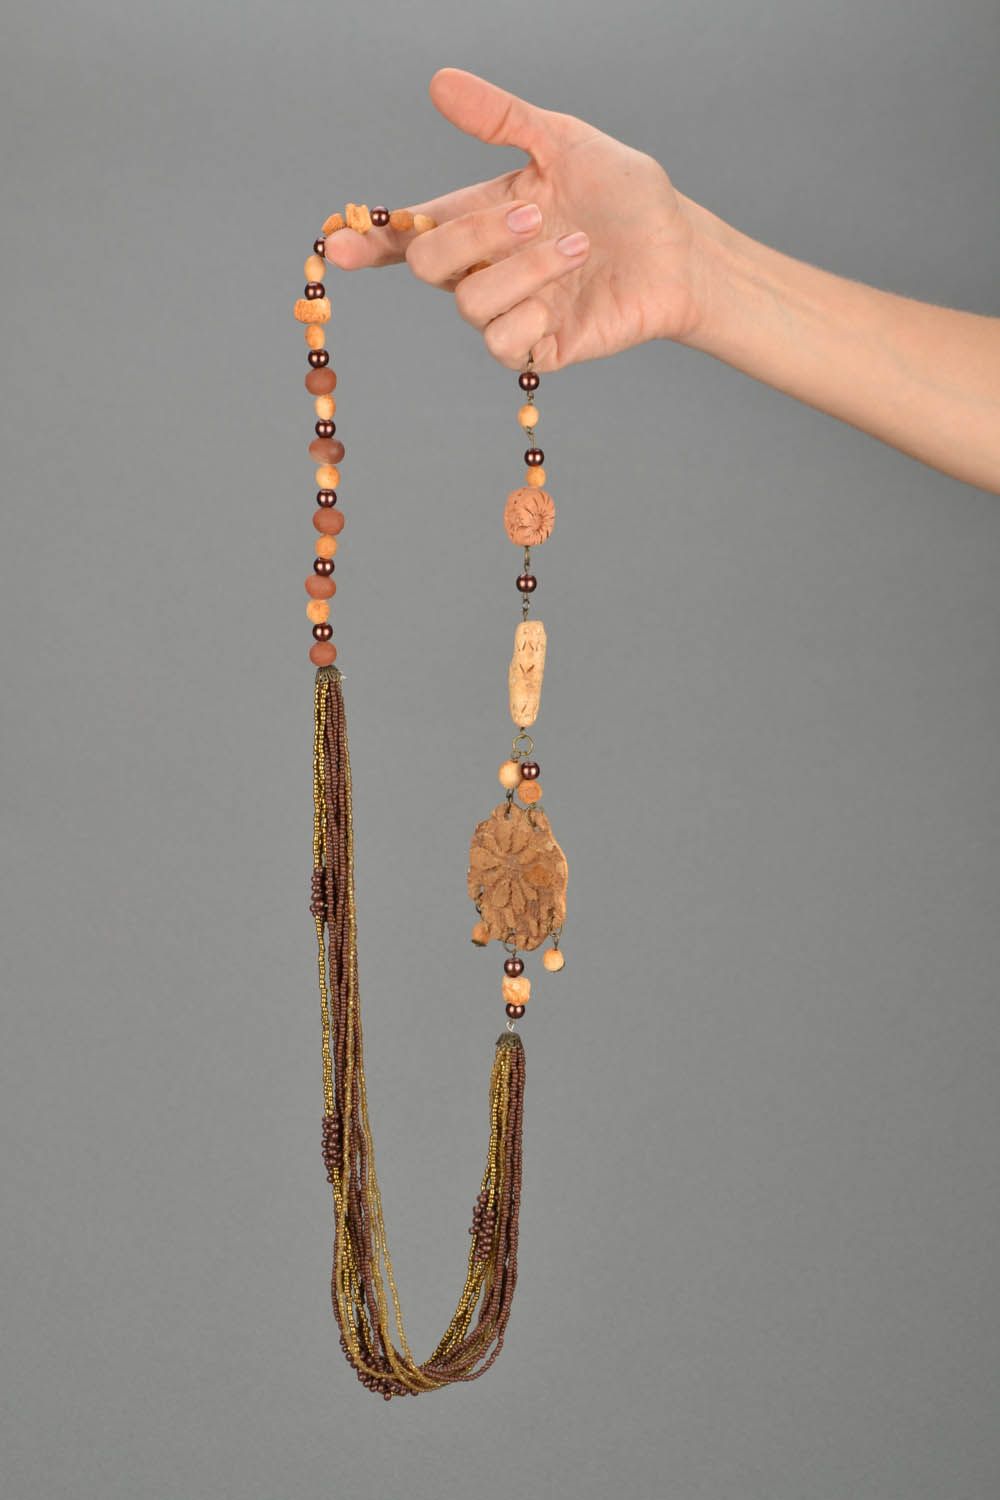 Necklace made of natural clay and beads photo 2